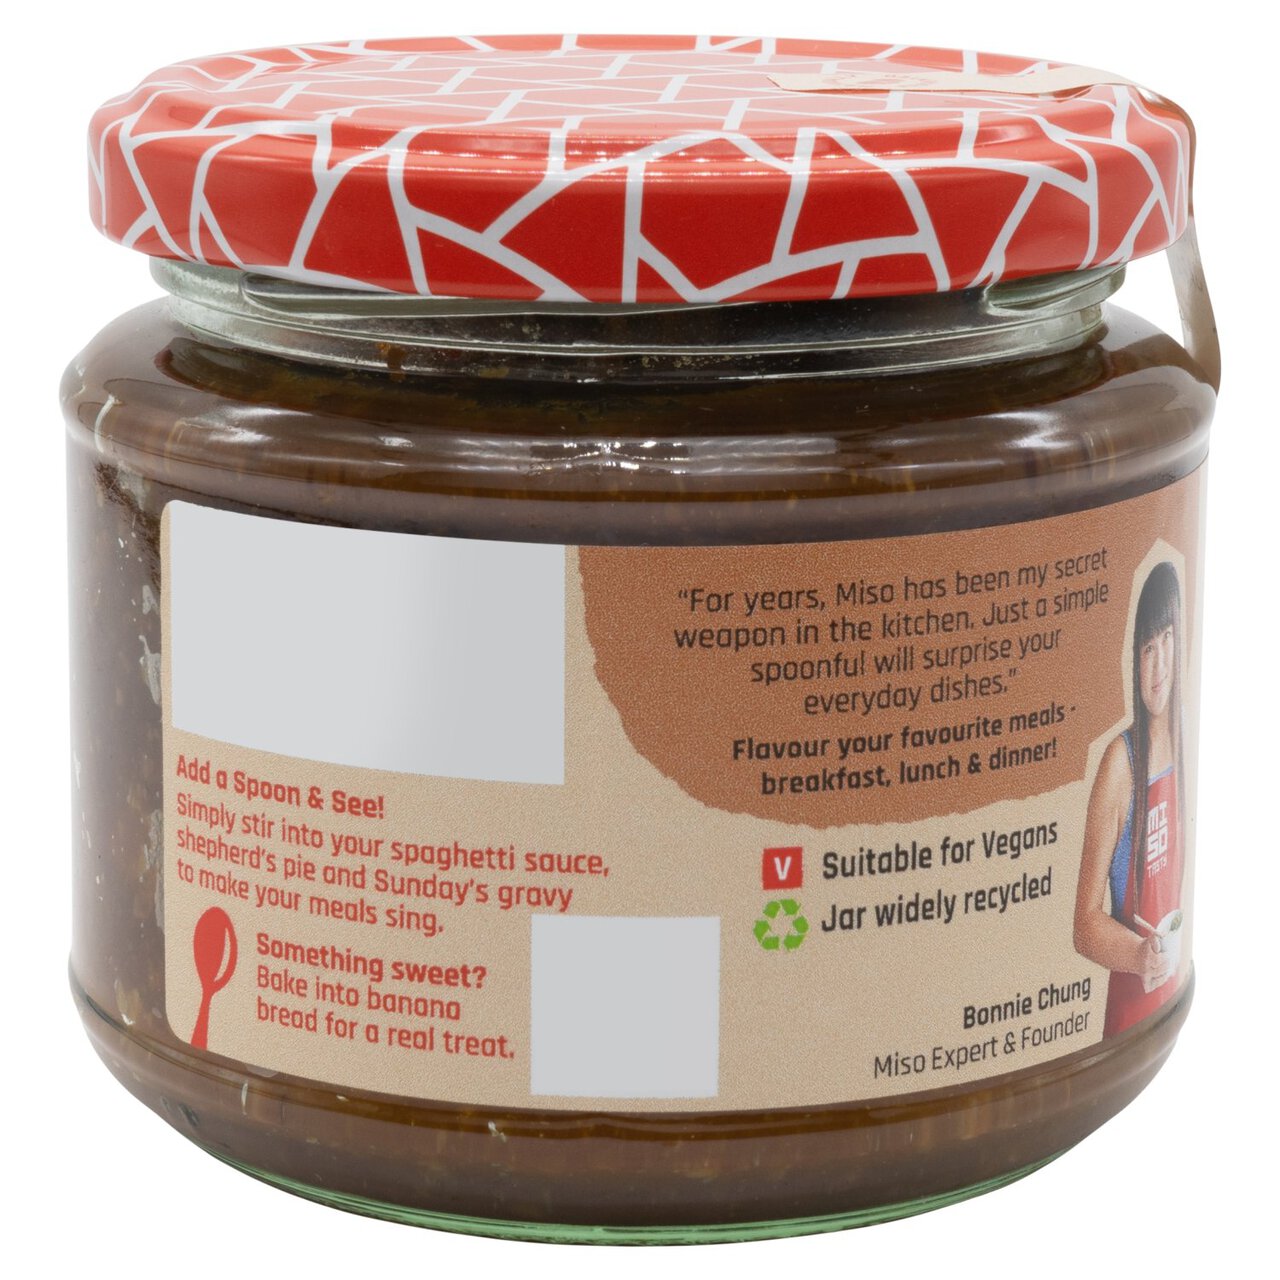 Miso Tasty Organic Red Aka Miso Cooking Paste 200g